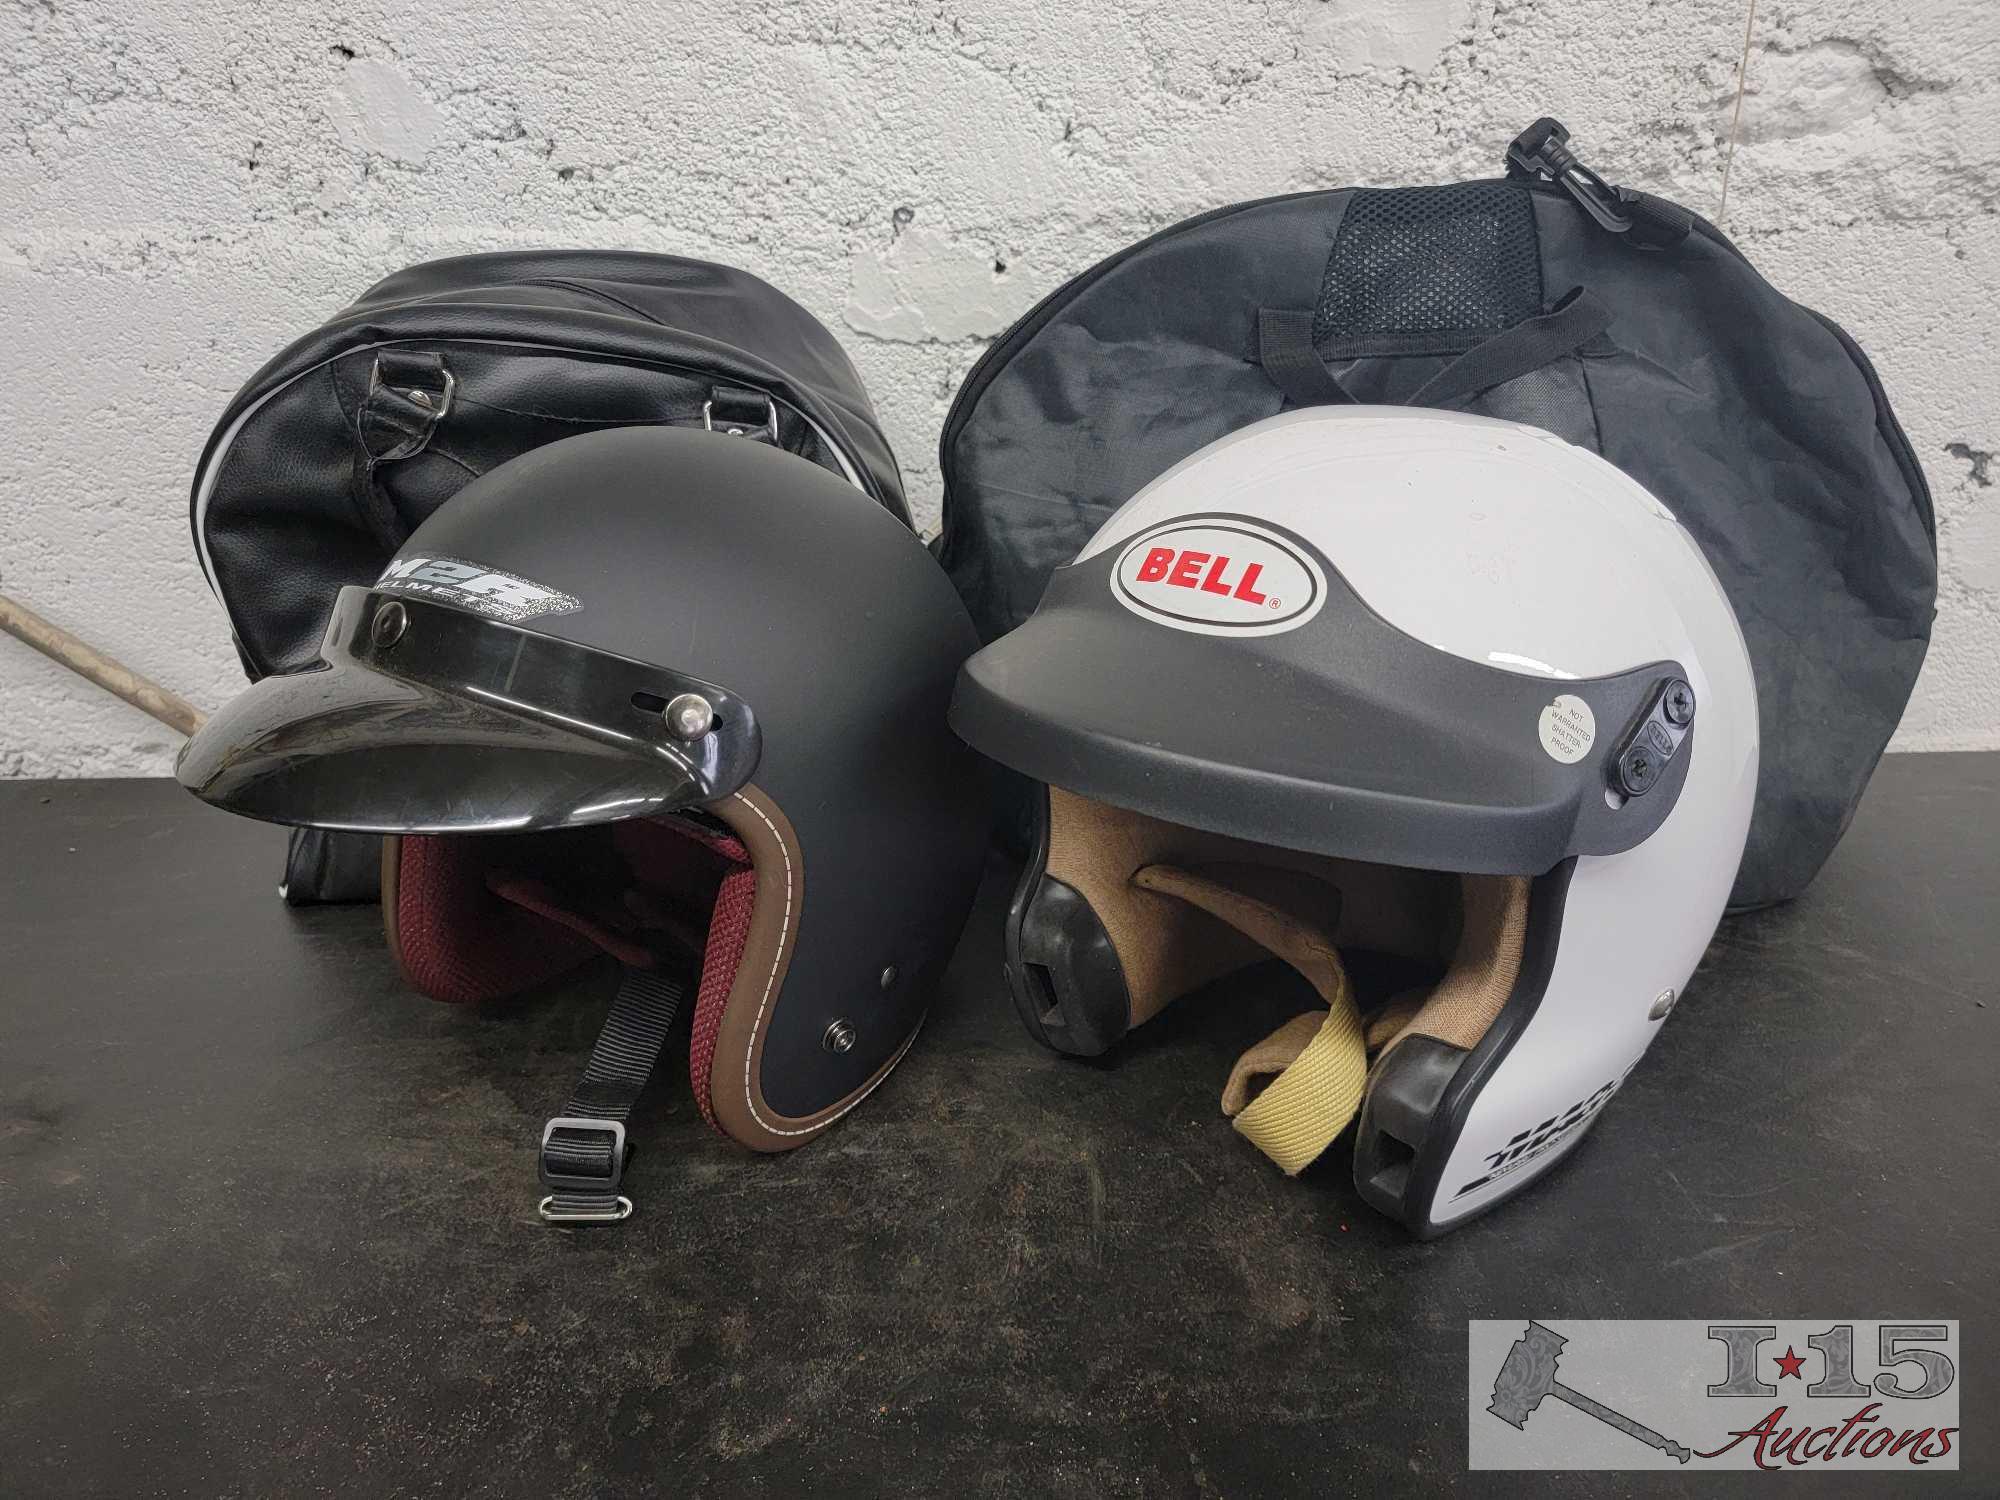 M2R and Bell Motorcycle Helmet with Bags | Proxibid